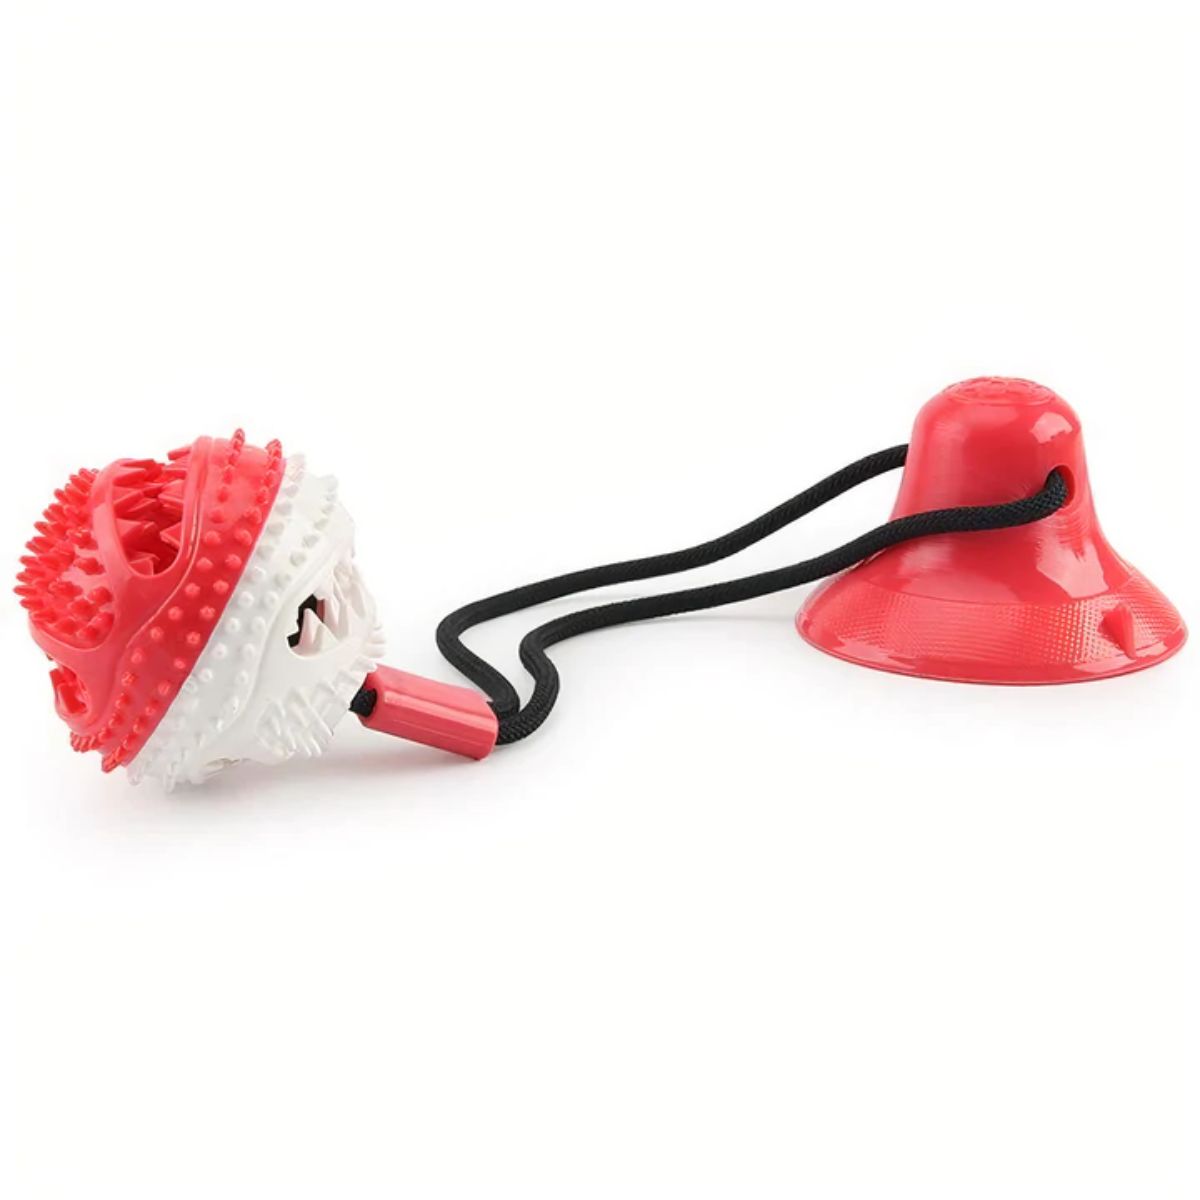 Dog tug toy Chewy ball red